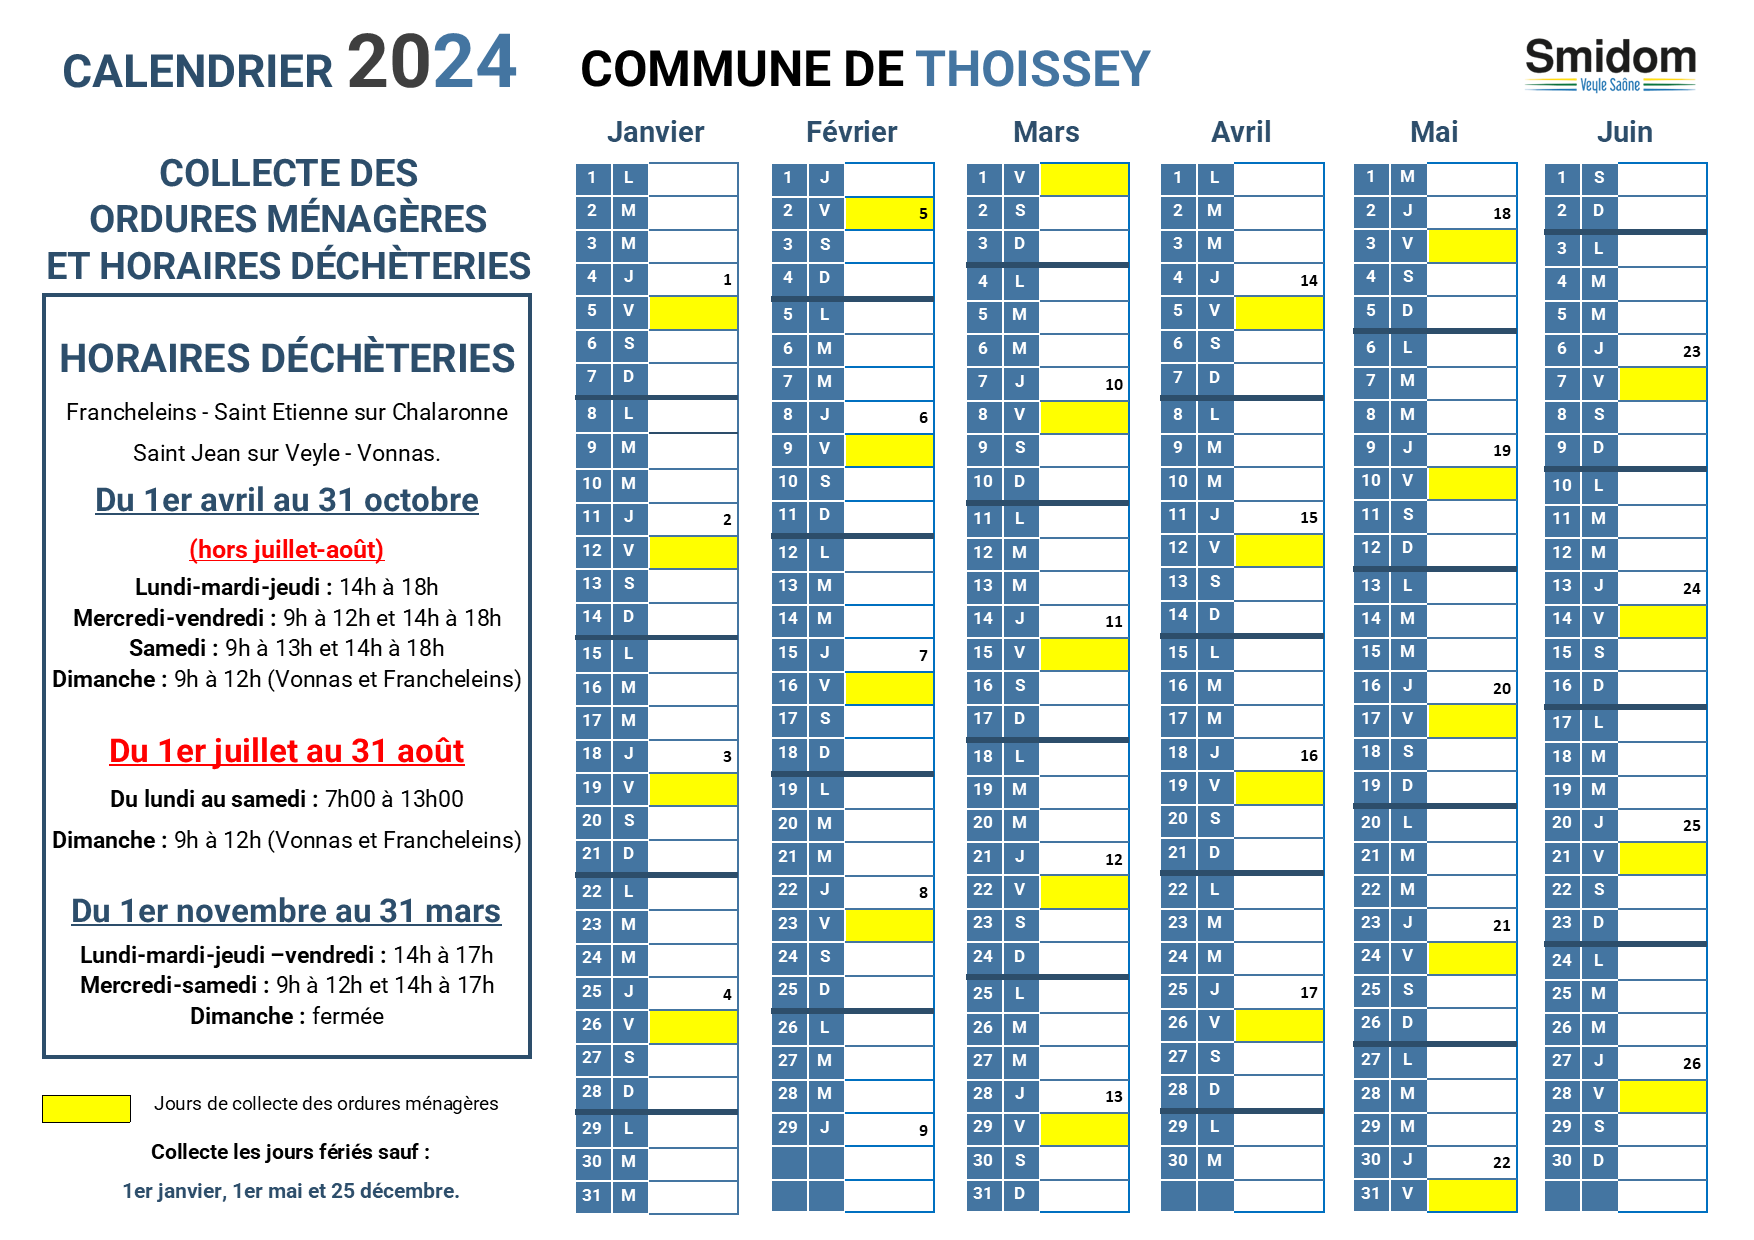 THOISSEY - Calendrier 2024.png